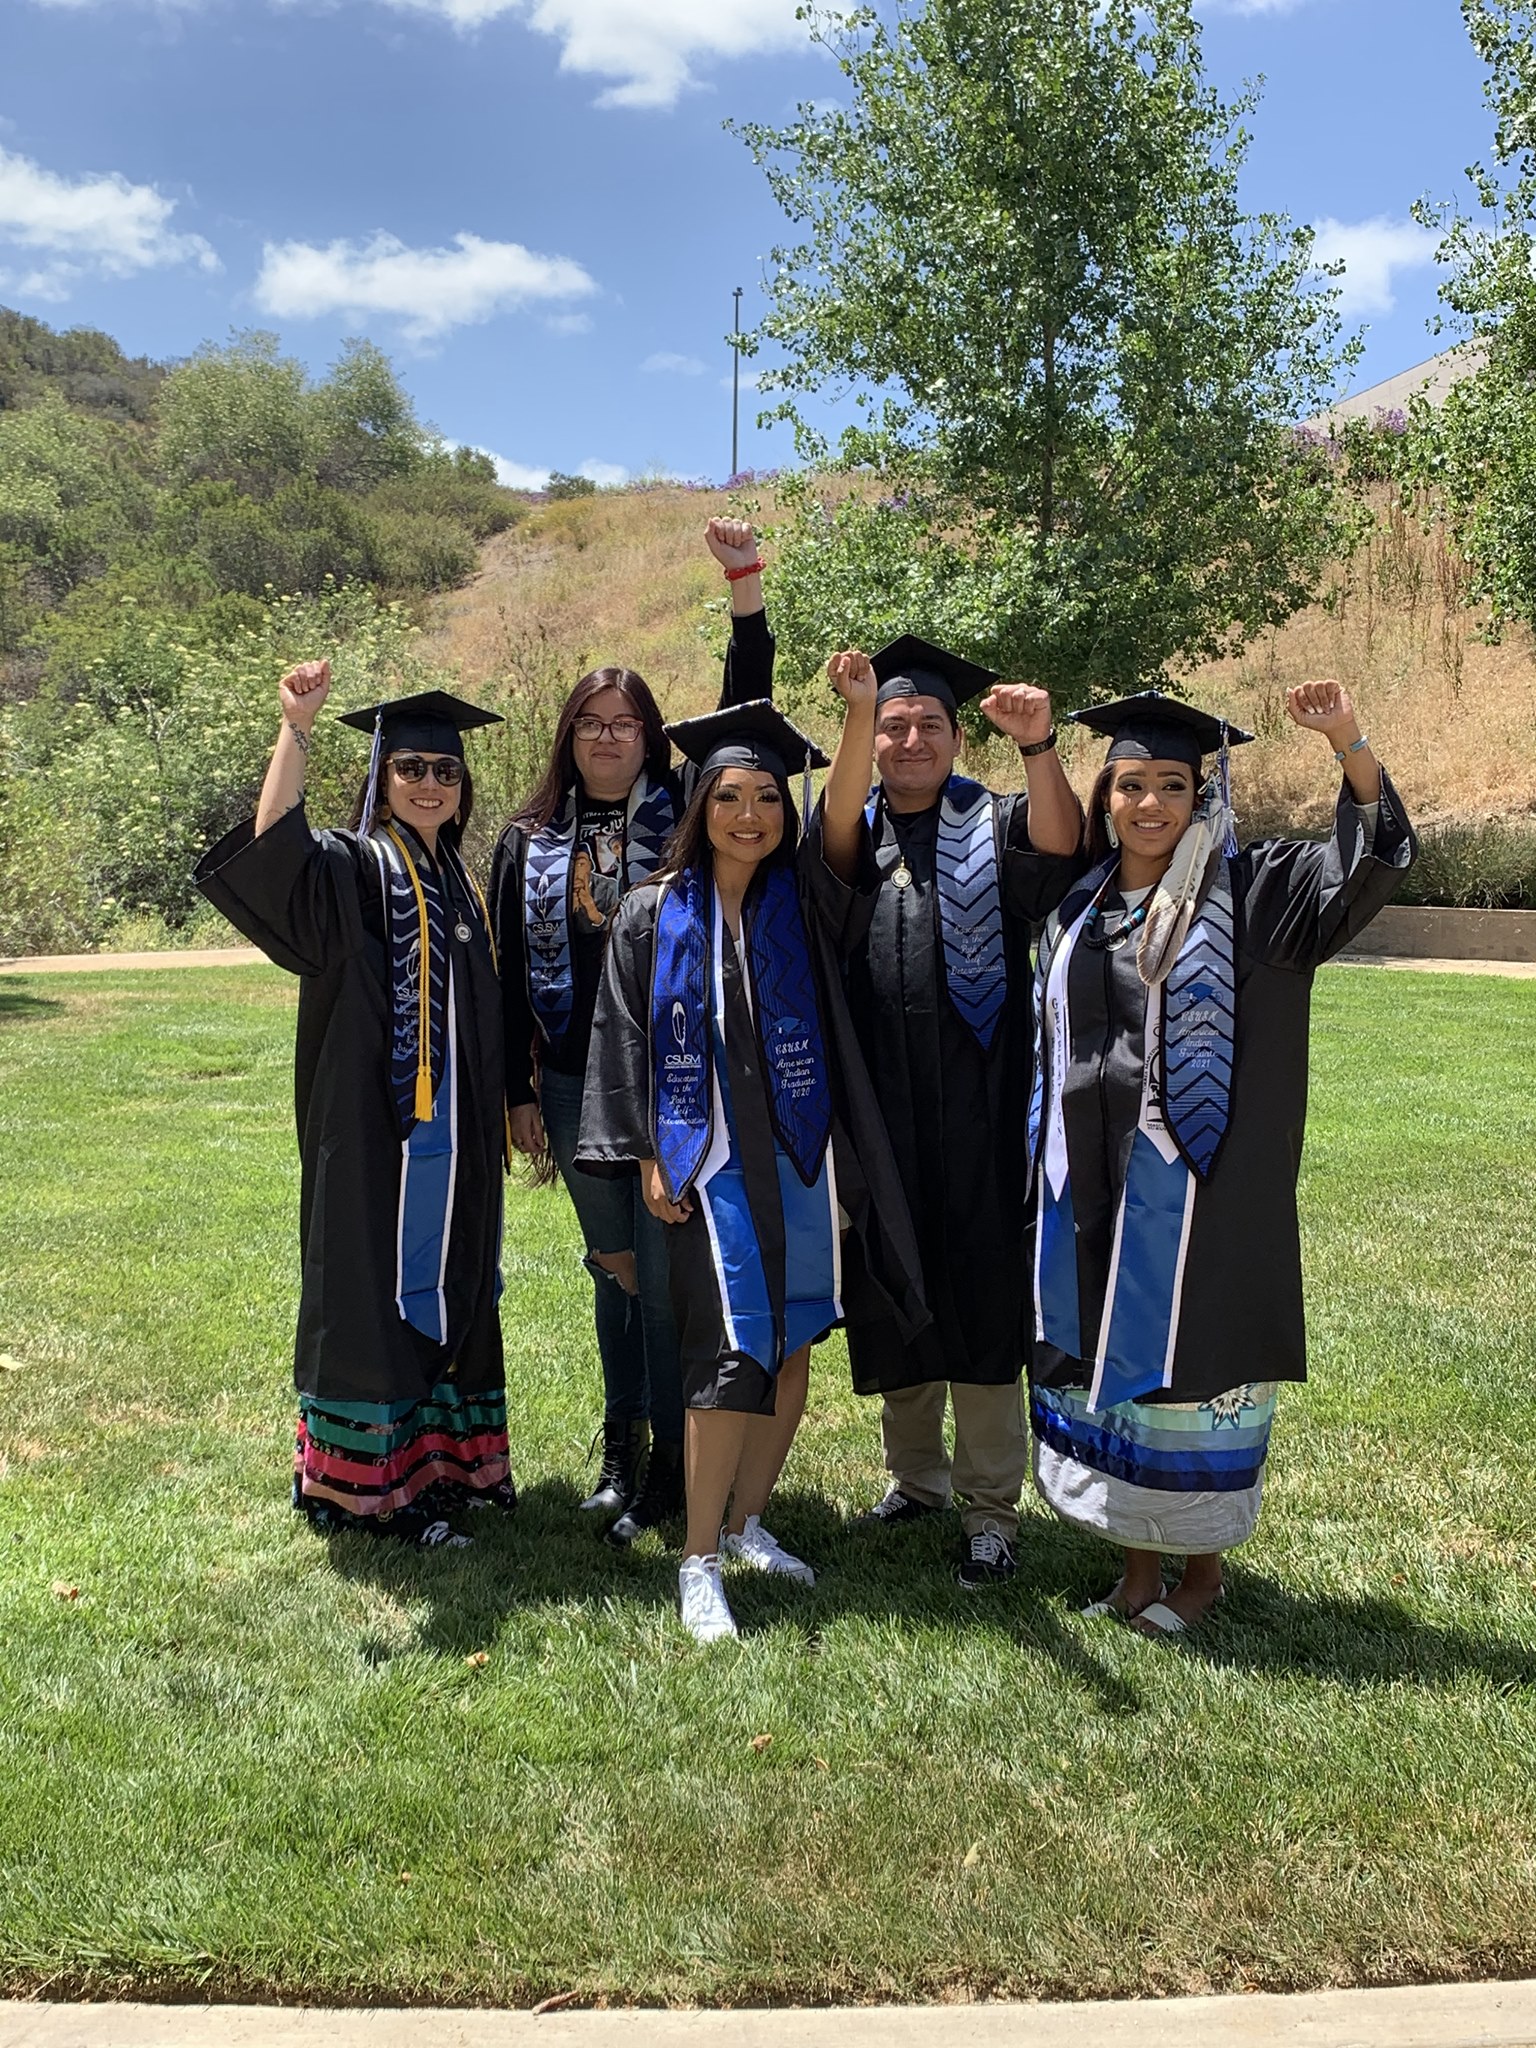 Group picture of American Indian graduates in their capa, gowns, and stoles,smiling and raising one fist